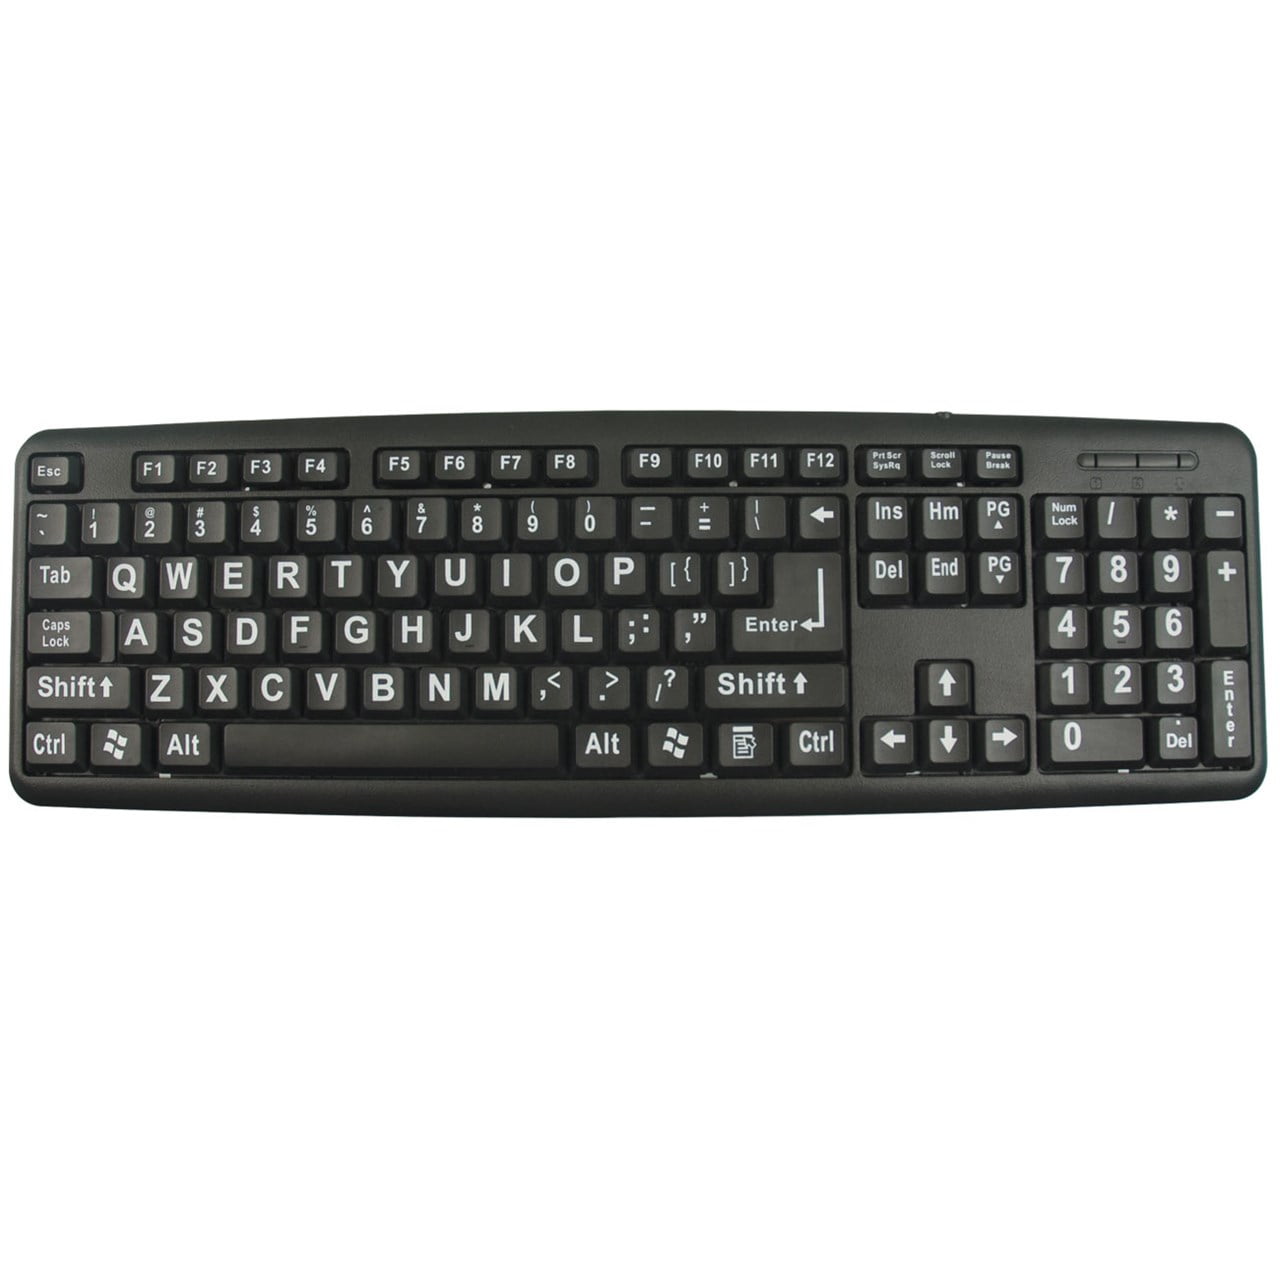 Logickeyboard Wireless for Mac and iPad with XL Print White Letters on  Black Keys • Bluetooth connectivity • Light Form Factor with 78 Keys •